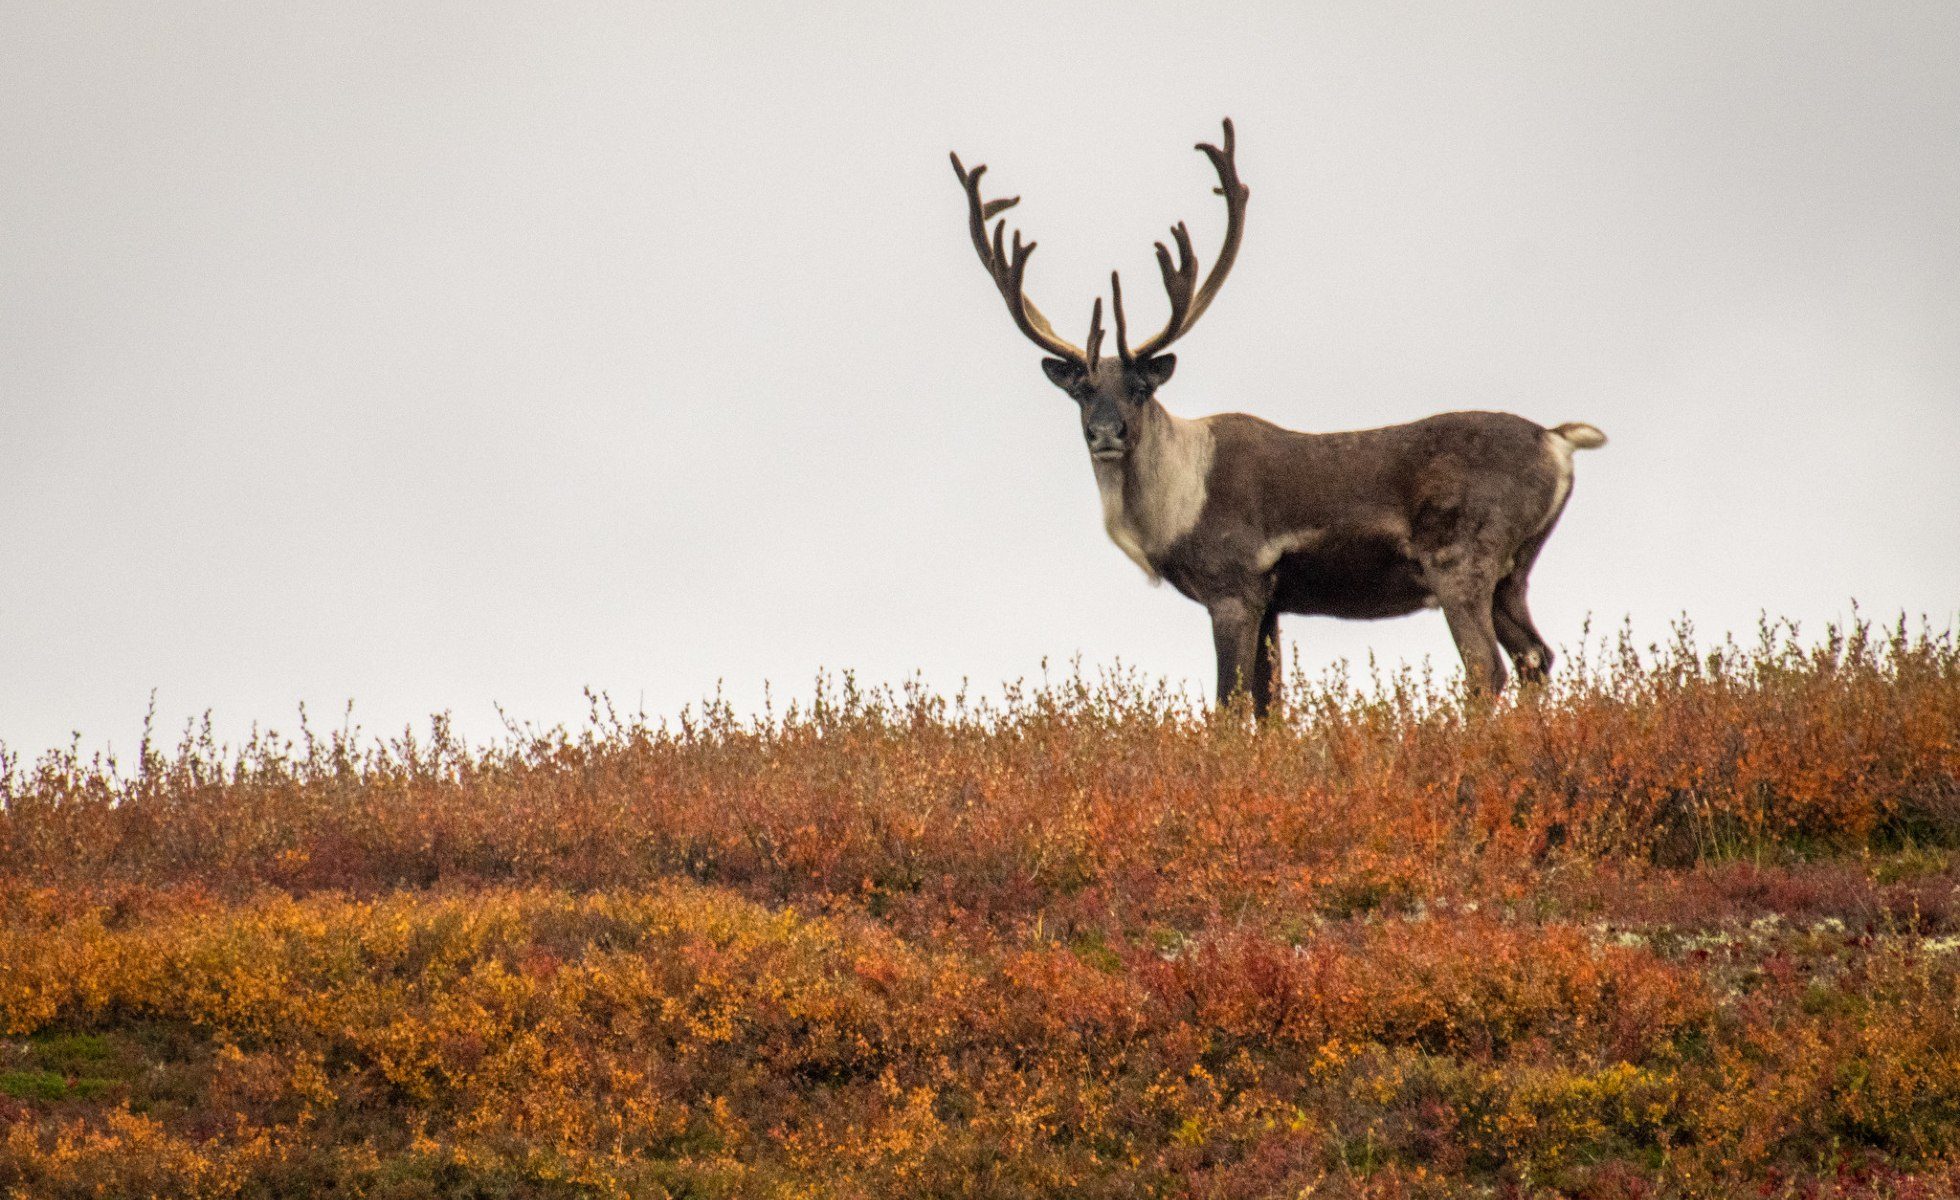 Caribou standing on hill, looking directly at